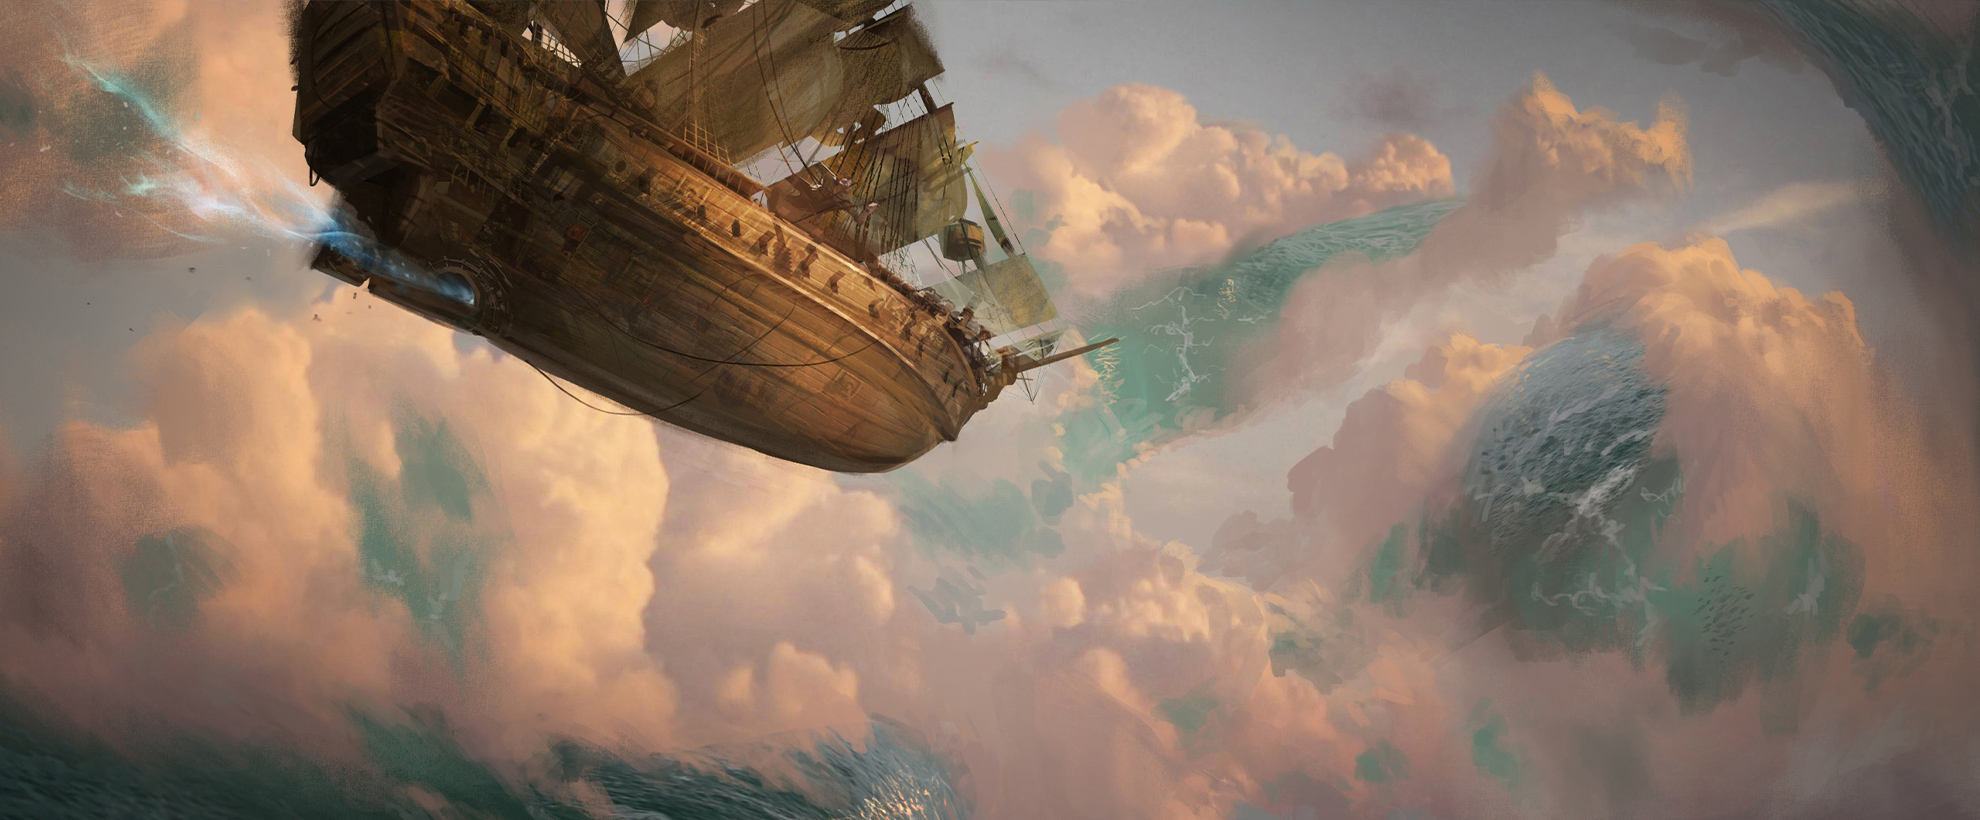 Concept art showing a flying pirate ship against pink and orange tinted clouds